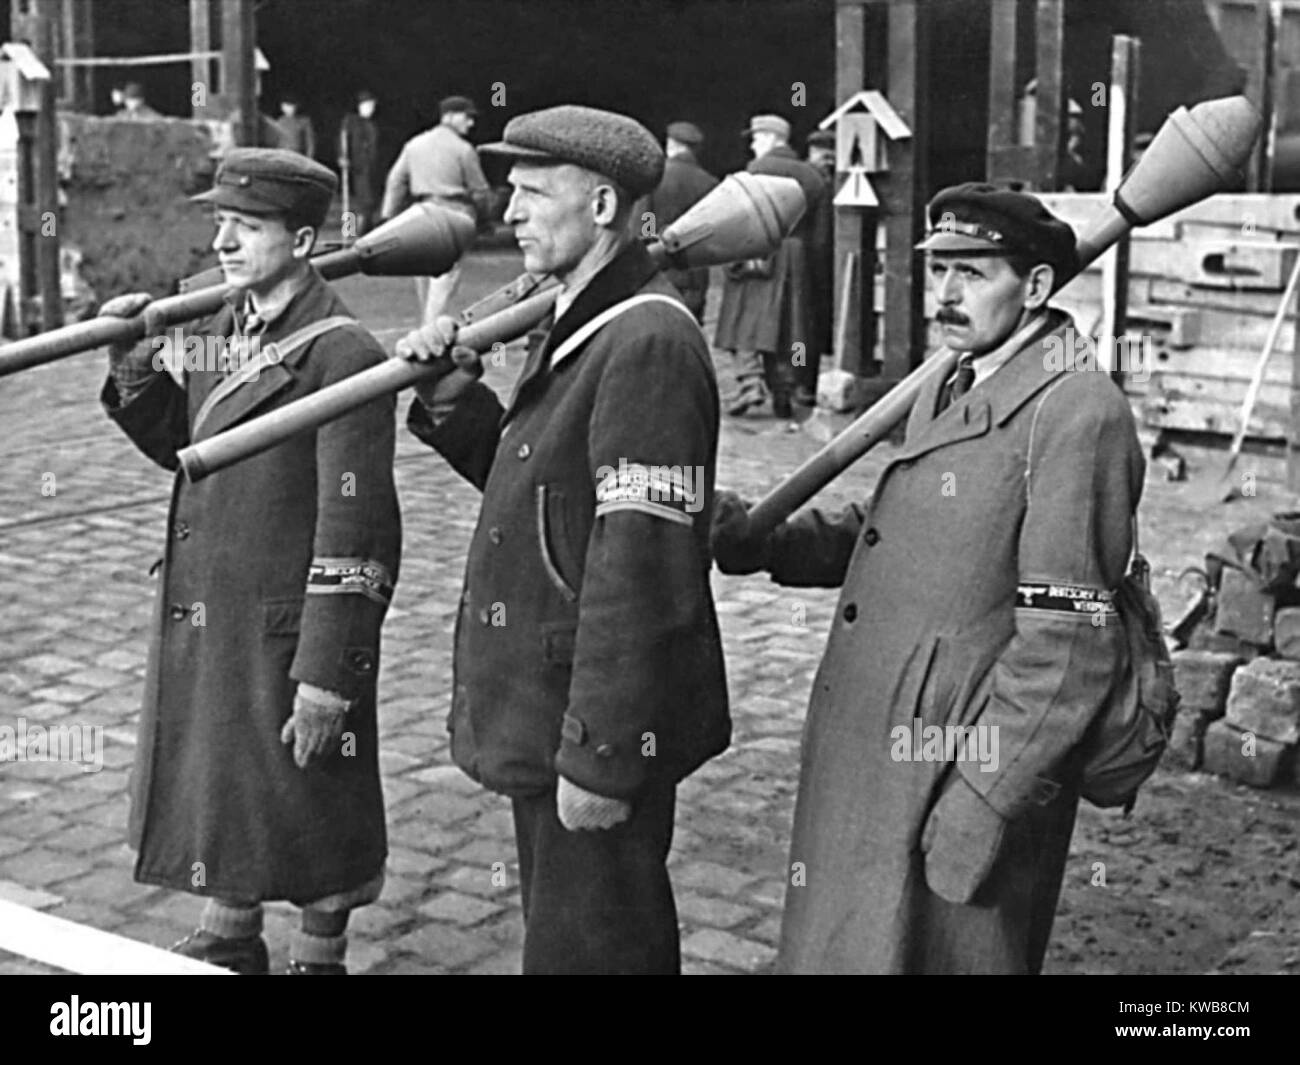 Some of the 60,000 Volksstrum engaged in the Battle of Berlin, April 16-May 2, 1945. These civilian members of the German militia are armed with anti-tank rocket-propelled grenades, 'Faustpatrone'. World War 2. (BSLOC 2014 8 73) Stock Photo